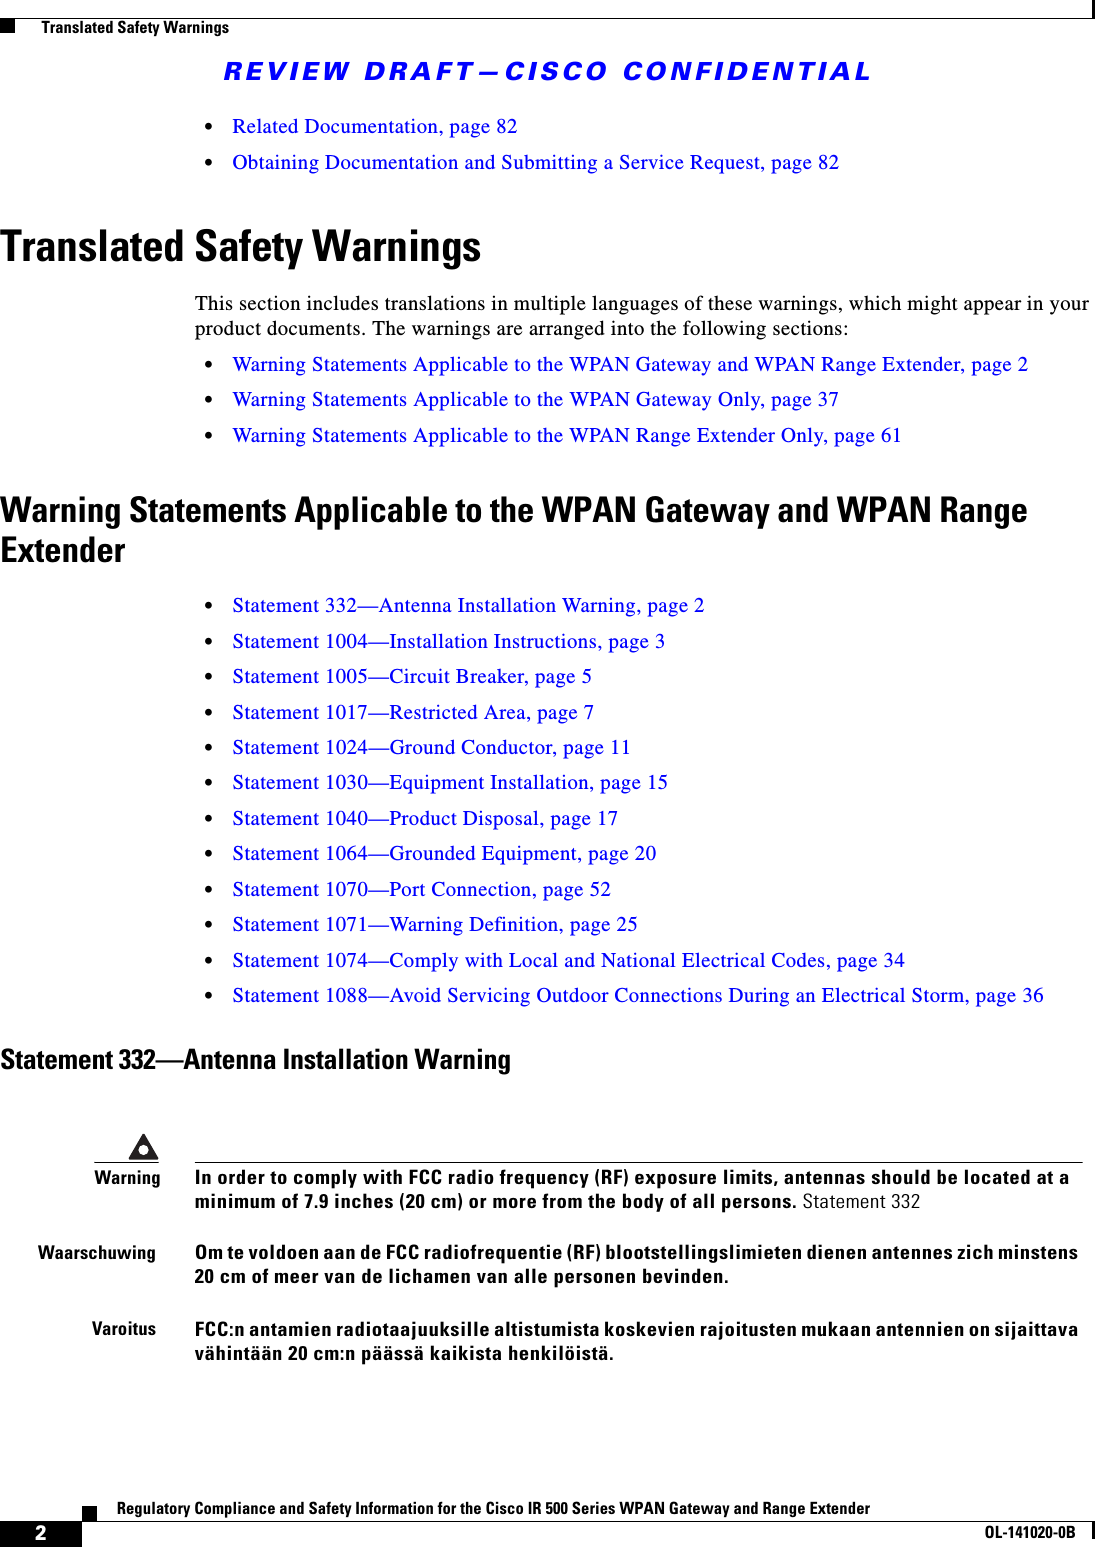 REVIEW DRAFT—CISCO CONFIDENTIAL2Regulatory Compliance and Safety Information for the Cisco IR 500 Series WPAN Gateway and Range ExtenderOL-141020-0B  Translated Safety Warnings•Related Documentation, page 82•Obtaining Documentation and Submitting a Service Request, page 82Translated Safety WarningsThis section includes translations in multiple languages of these warnings, which might appear in your product documents. The warnings are arranged into the following sections:•Warning Statements Applicable to the WPAN Gateway and WPAN Range Extender, page 2•Warning Statements Applicable to the WPAN Gateway Only, page 37•Warning Statements Applicable to the WPAN Range Extender Only, page 61Warning Statements Applicable to the WPAN Gateway and WPAN Range Extender•Statement 332—Antenna Installation Warning, page 2•Statement 1004—Installation Instructions, page 3•Statement 1005—Circuit Breaker, page 5•Statement 1017—Restricted Area, page 7•Statement 1024—Ground Conductor, page 11•Statement 1030—Equipment Installation, page 15•Statement 1040—Product Disposal, page 17•Statement 1064—Grounded Equipment, page 20•Statement 1070—Port Connection, page 52•Statement 1071—Warning Definition, page 25•Statement 1074—Comply with Local and National Electrical Codes, page 34•Statement 1088—Avoid Servicing Outdoor Connections During an Electrical Storm, page 36Statement 332—Antenna Installation WarningWarningIn order to comply with FCC radio frequency (RF) exposure limits, antennas should be located at a minimum of 7.9 inches (20 cm) or more from the body of all persons. Statement 332WaarschuwingOm te voldoen aan de FCC radiofrequentie (RF) blootstellingslimieten dienen antennes zich minstens 20 cm of meer van de lichamen van alle personen bevinden.VaroitusFCC:n antamien radiotaajuuksille altistumista koskevien rajoitusten mukaan antennien on sijaittava vähintään 20 cm:n päässä kaikista henkilöistä.